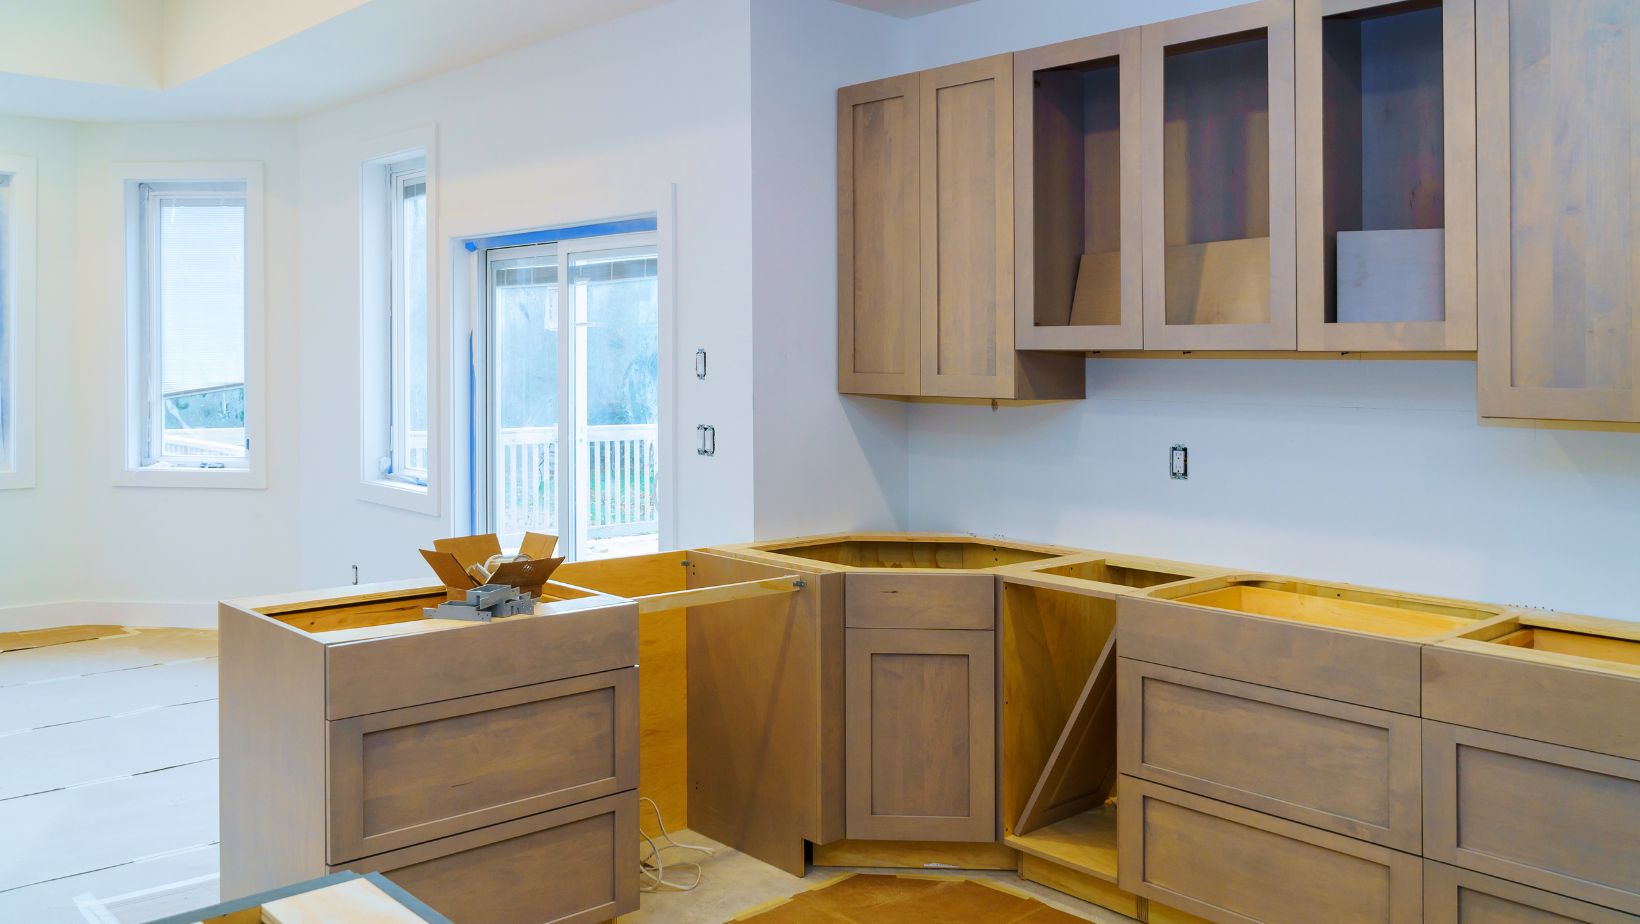 How Much Does It Cost To Remodel A Kitchen